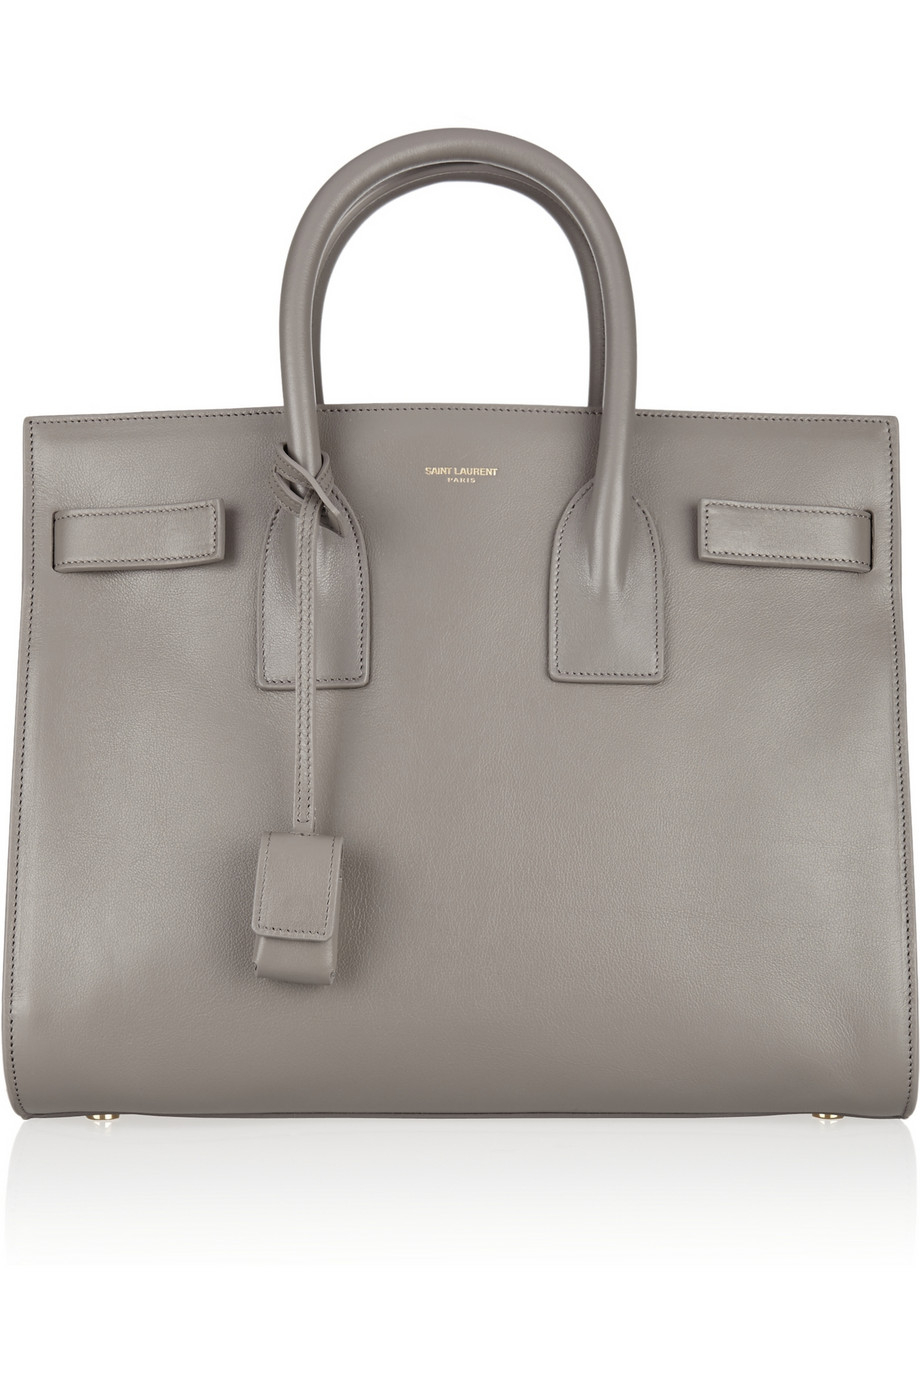 Saint laurent Sac De Jour Small Leather Tote in Gray | Lyst